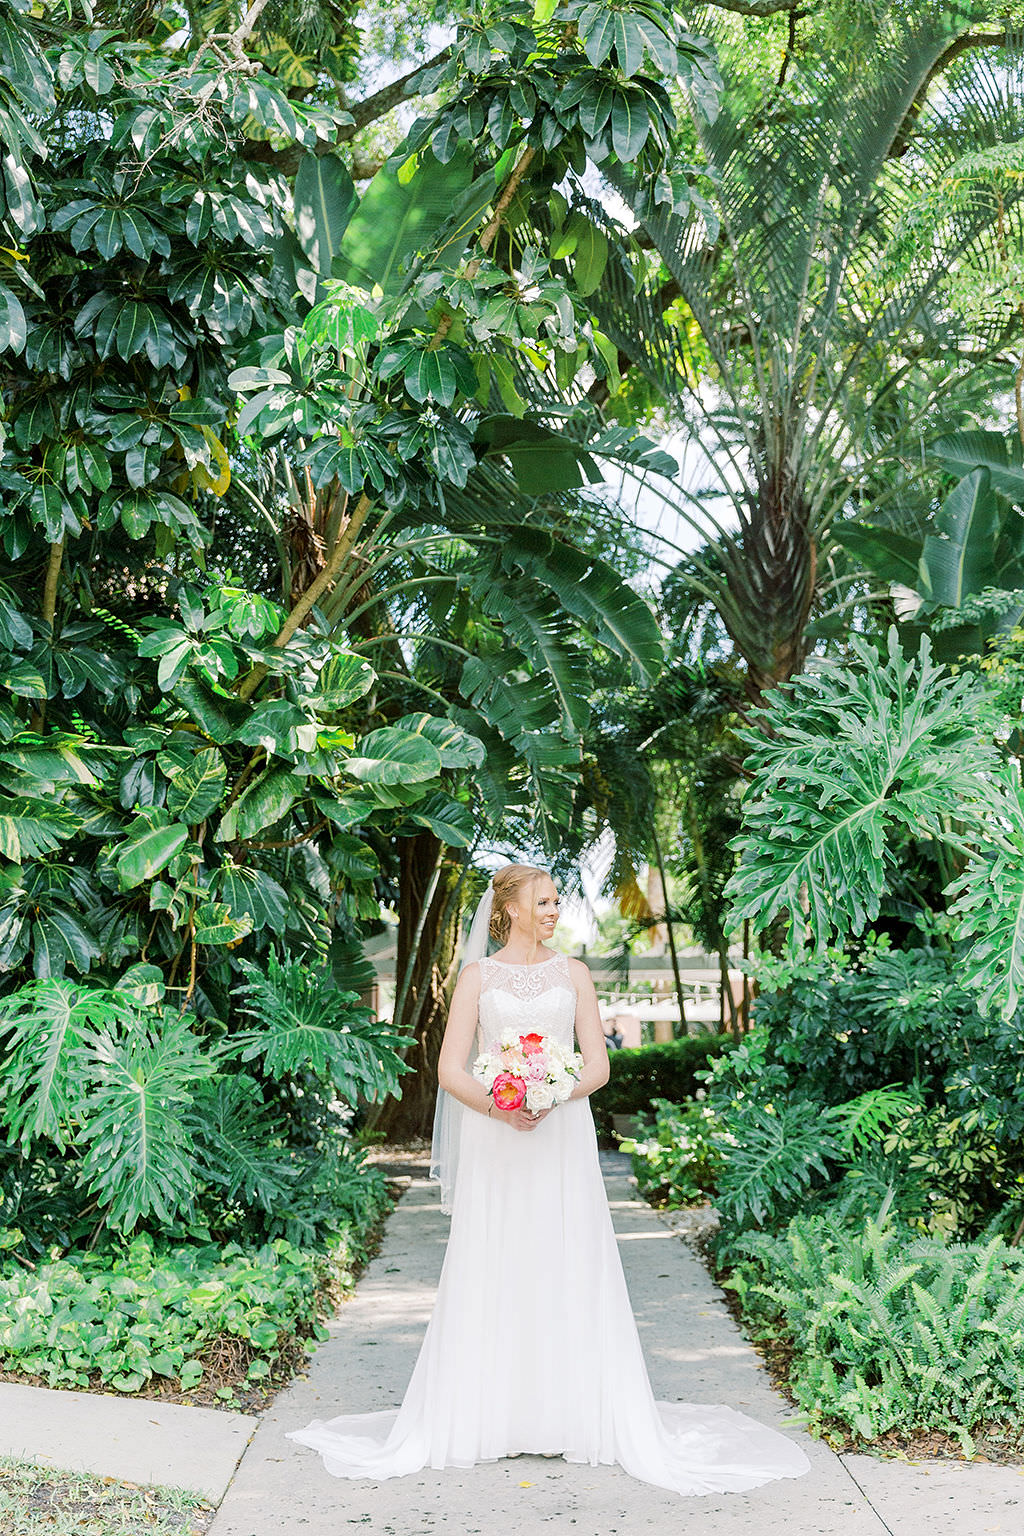 Tampa Bay Bride Wedding Portrait in Tropical Garden in High Illusion Crew Neck Neckline Wedding Dress with Colorful Pink and White Floral Bridal Bouquet